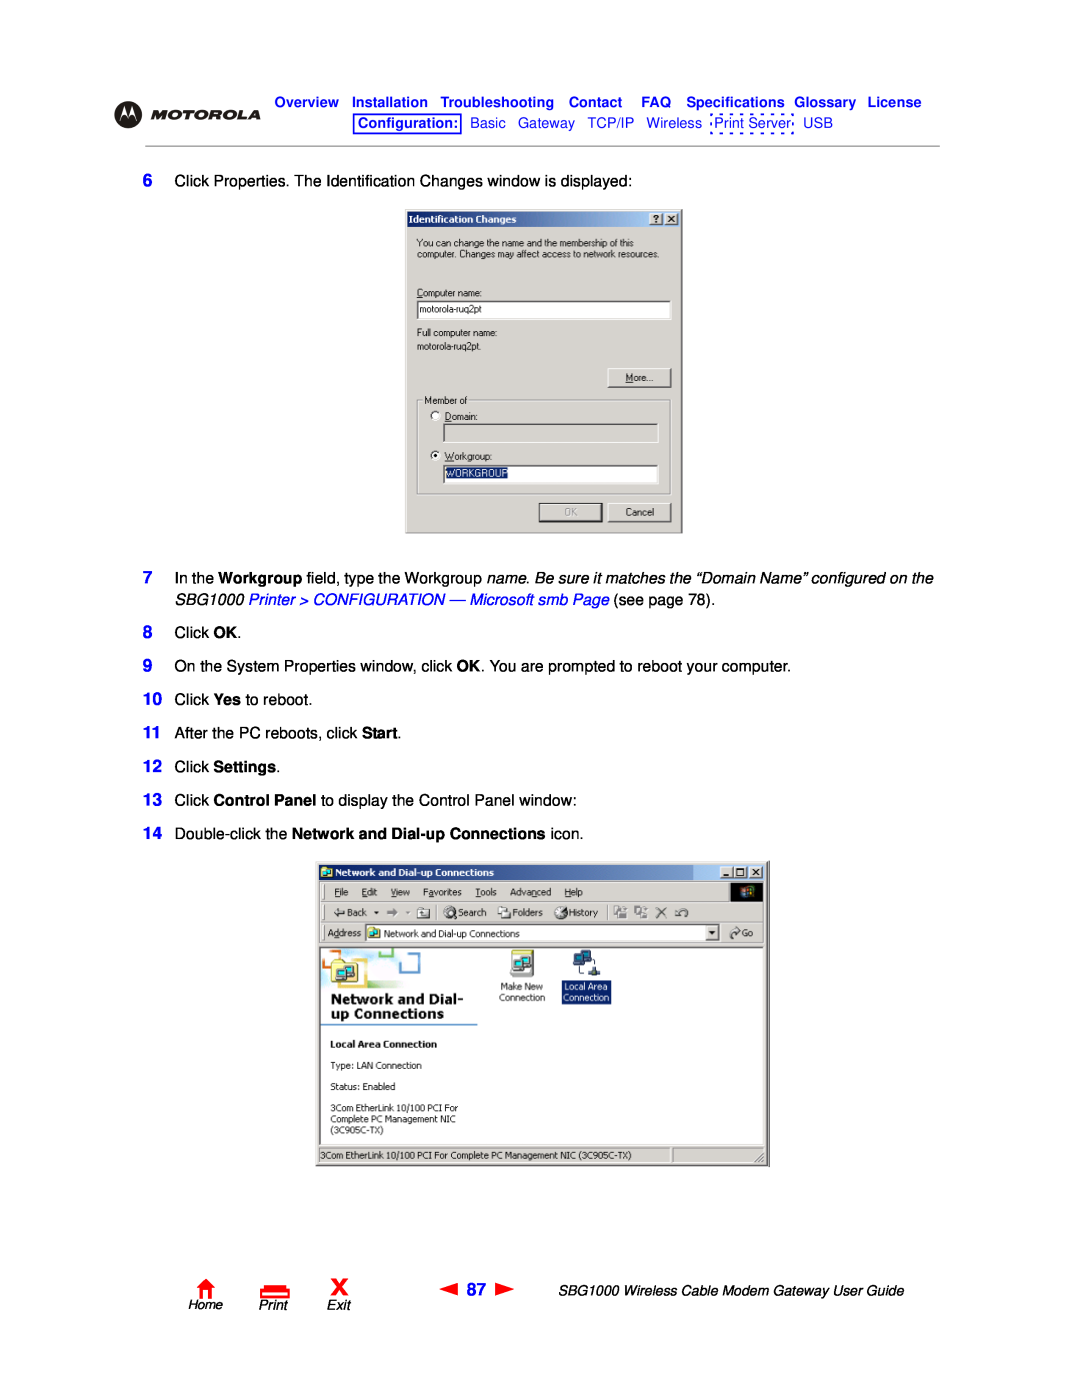 Motorola SBG1000 manual Click Settings, Double-click the Network and Dial-up Connections icon 